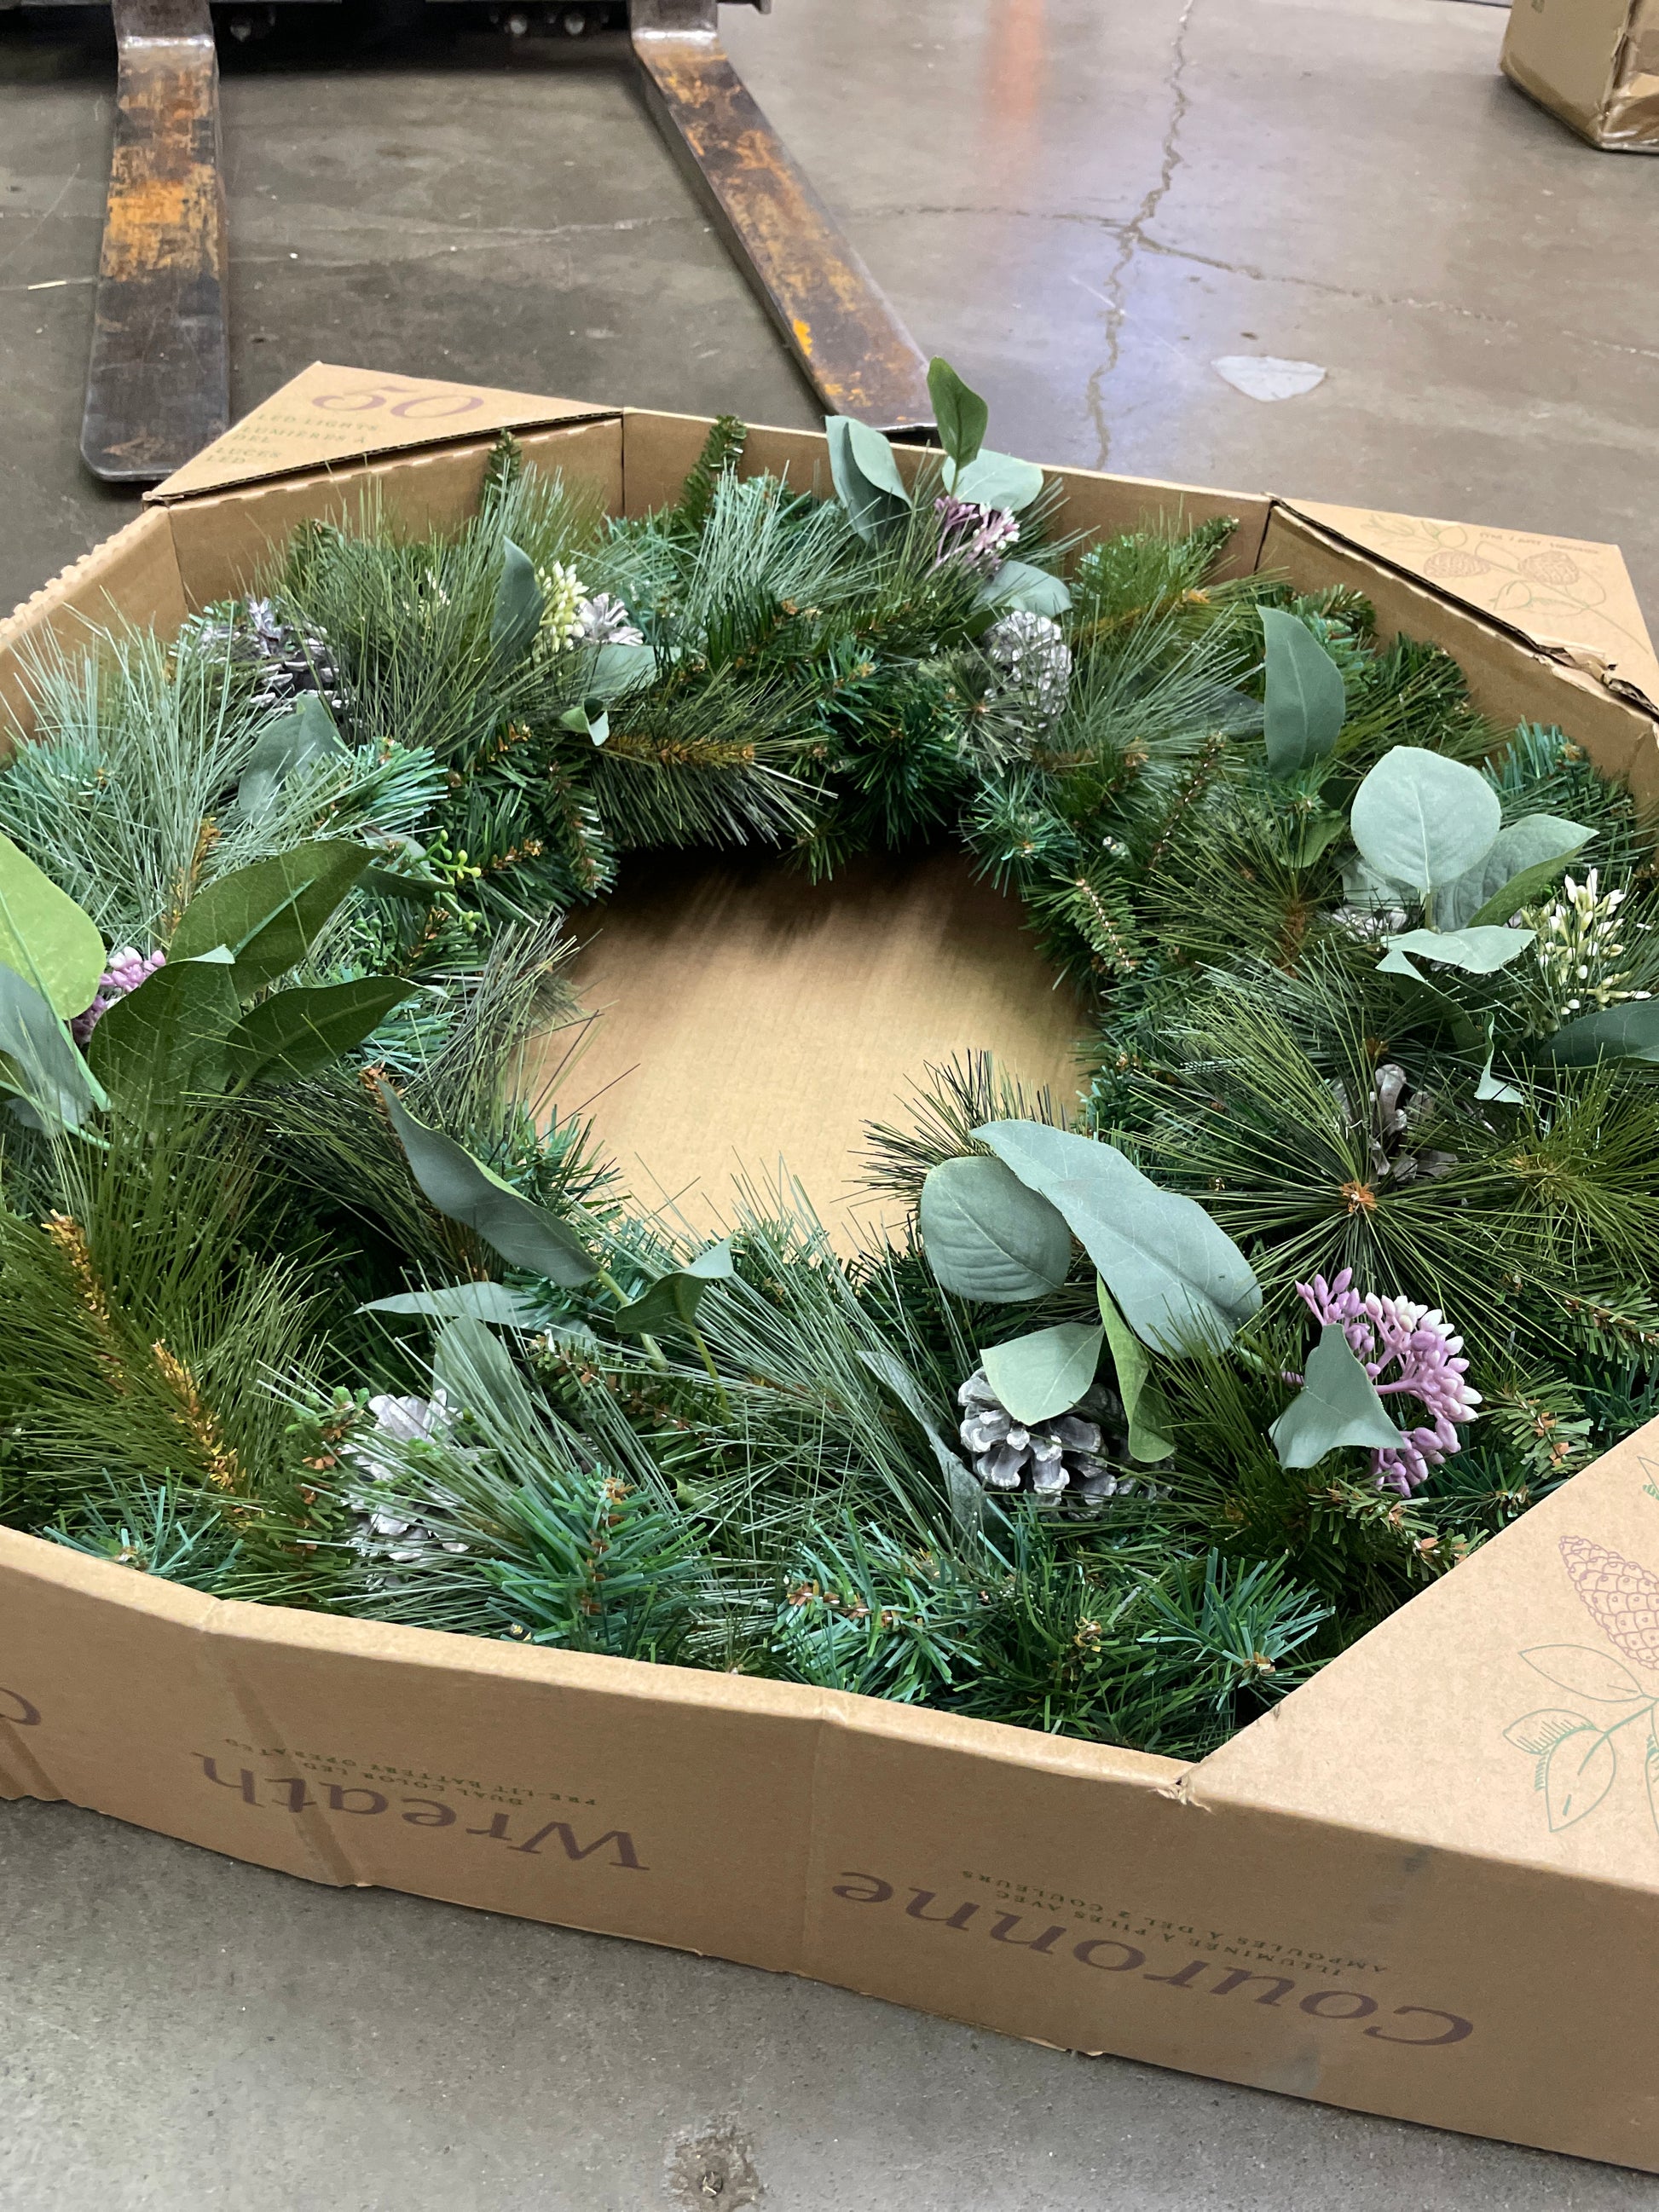 Costco - 32" LED Mixed Greenery Wreath - Retail $49 Default Title